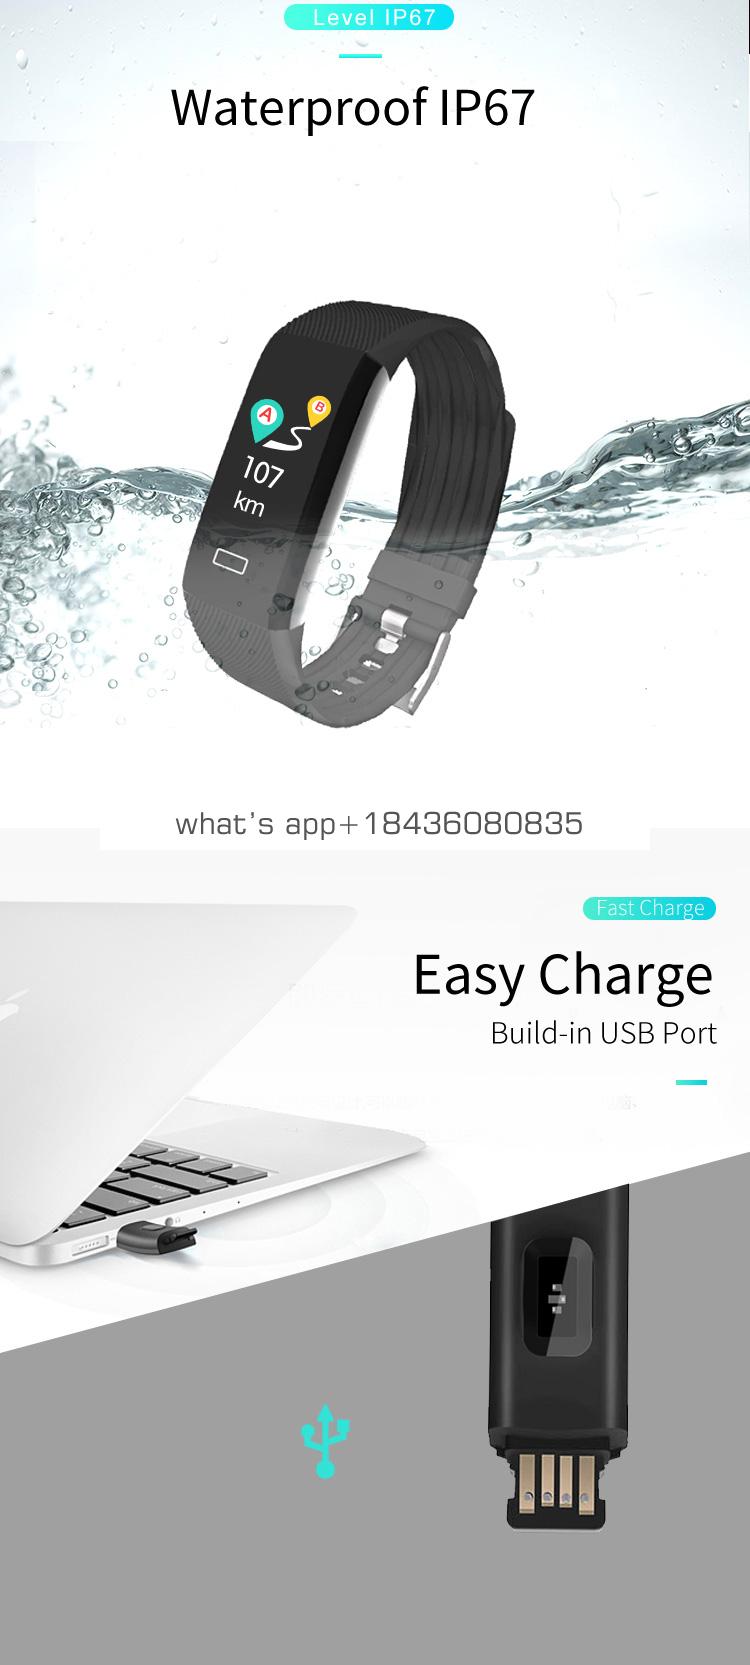 Sport smart wristband bar waterproof IP 67 blood pressure smartwatch for IOS Android ID115 plus Color HR